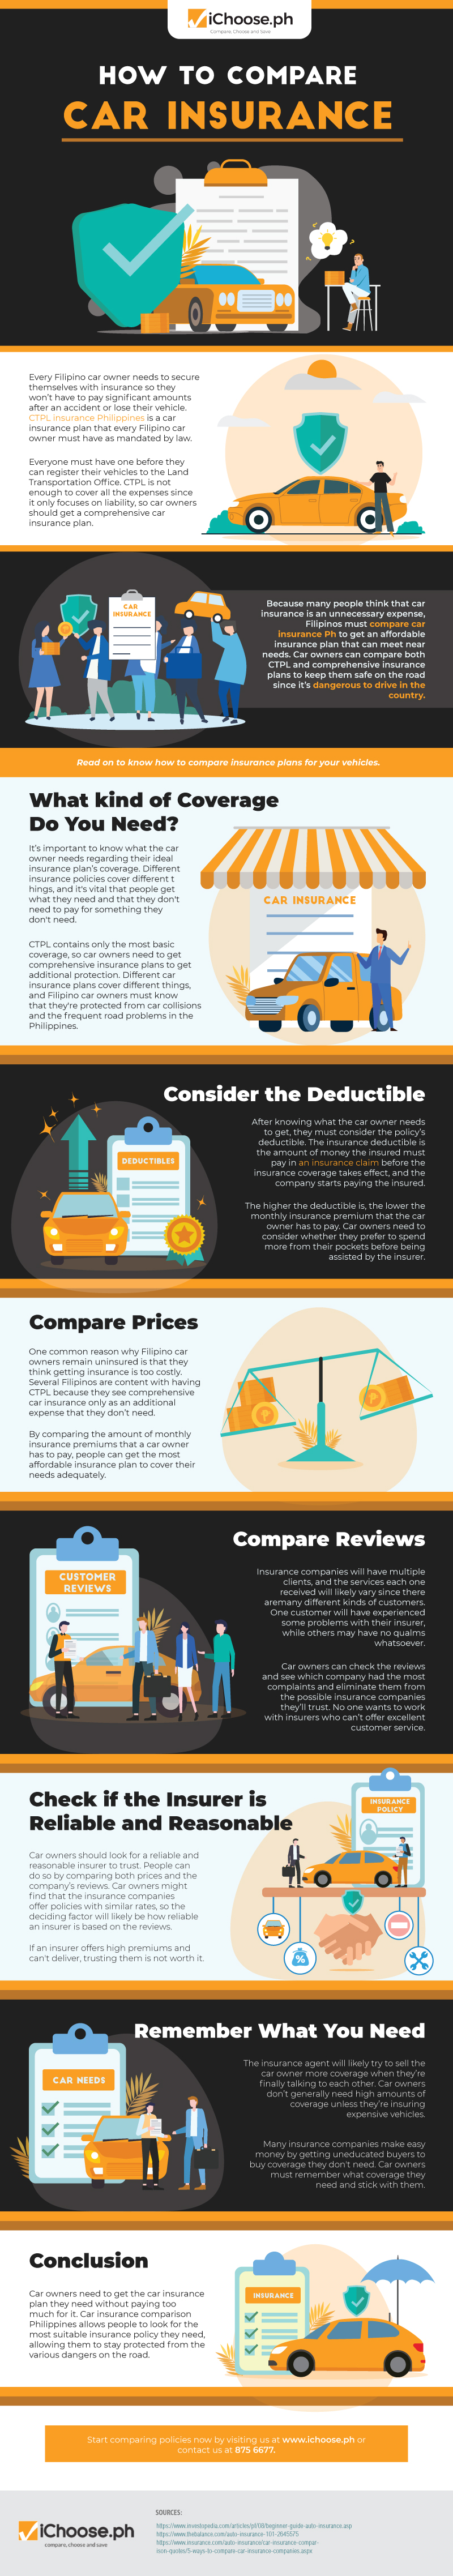 How to Compare Car Insurance [Infographic]| iChoose.ph